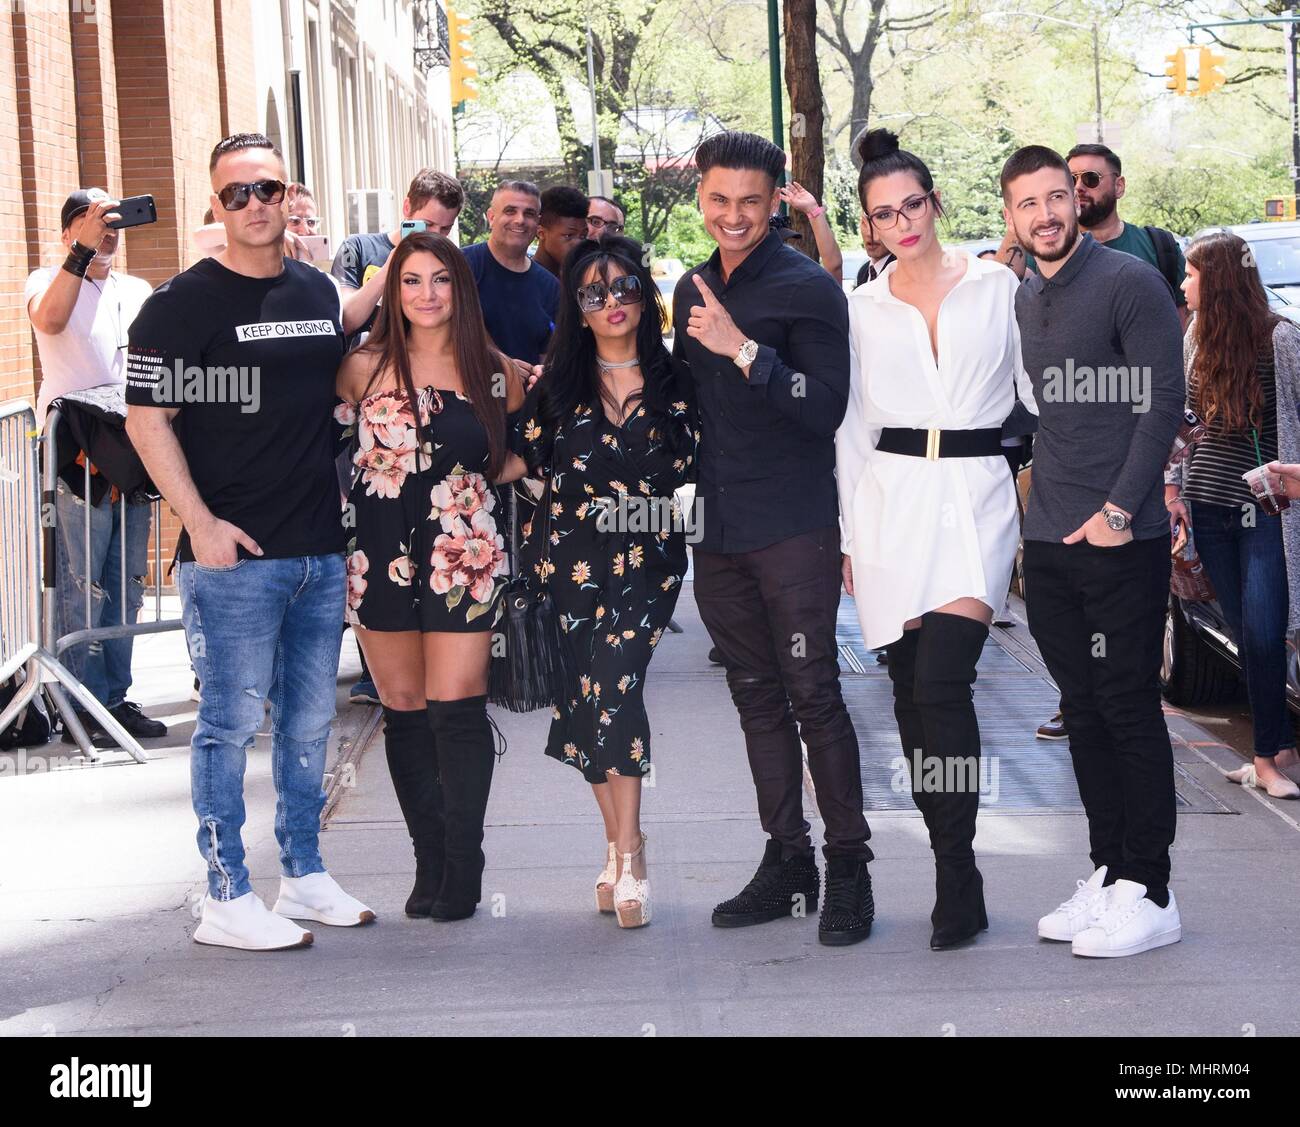 New York, NY, USA. 2nd May, 2018. Michael The Situation Sorrentino, Deena Nicole Cortese, Nicole Snooki Polizzi, Paul DelVecchio, Jenni J-Woww Farley and Vinny Guadagnino out and about for Celebrity Candids - WED, New York, NY May 2, 2018. Credit: RCF/Everett Collection/Alamy Live News Stock Photo